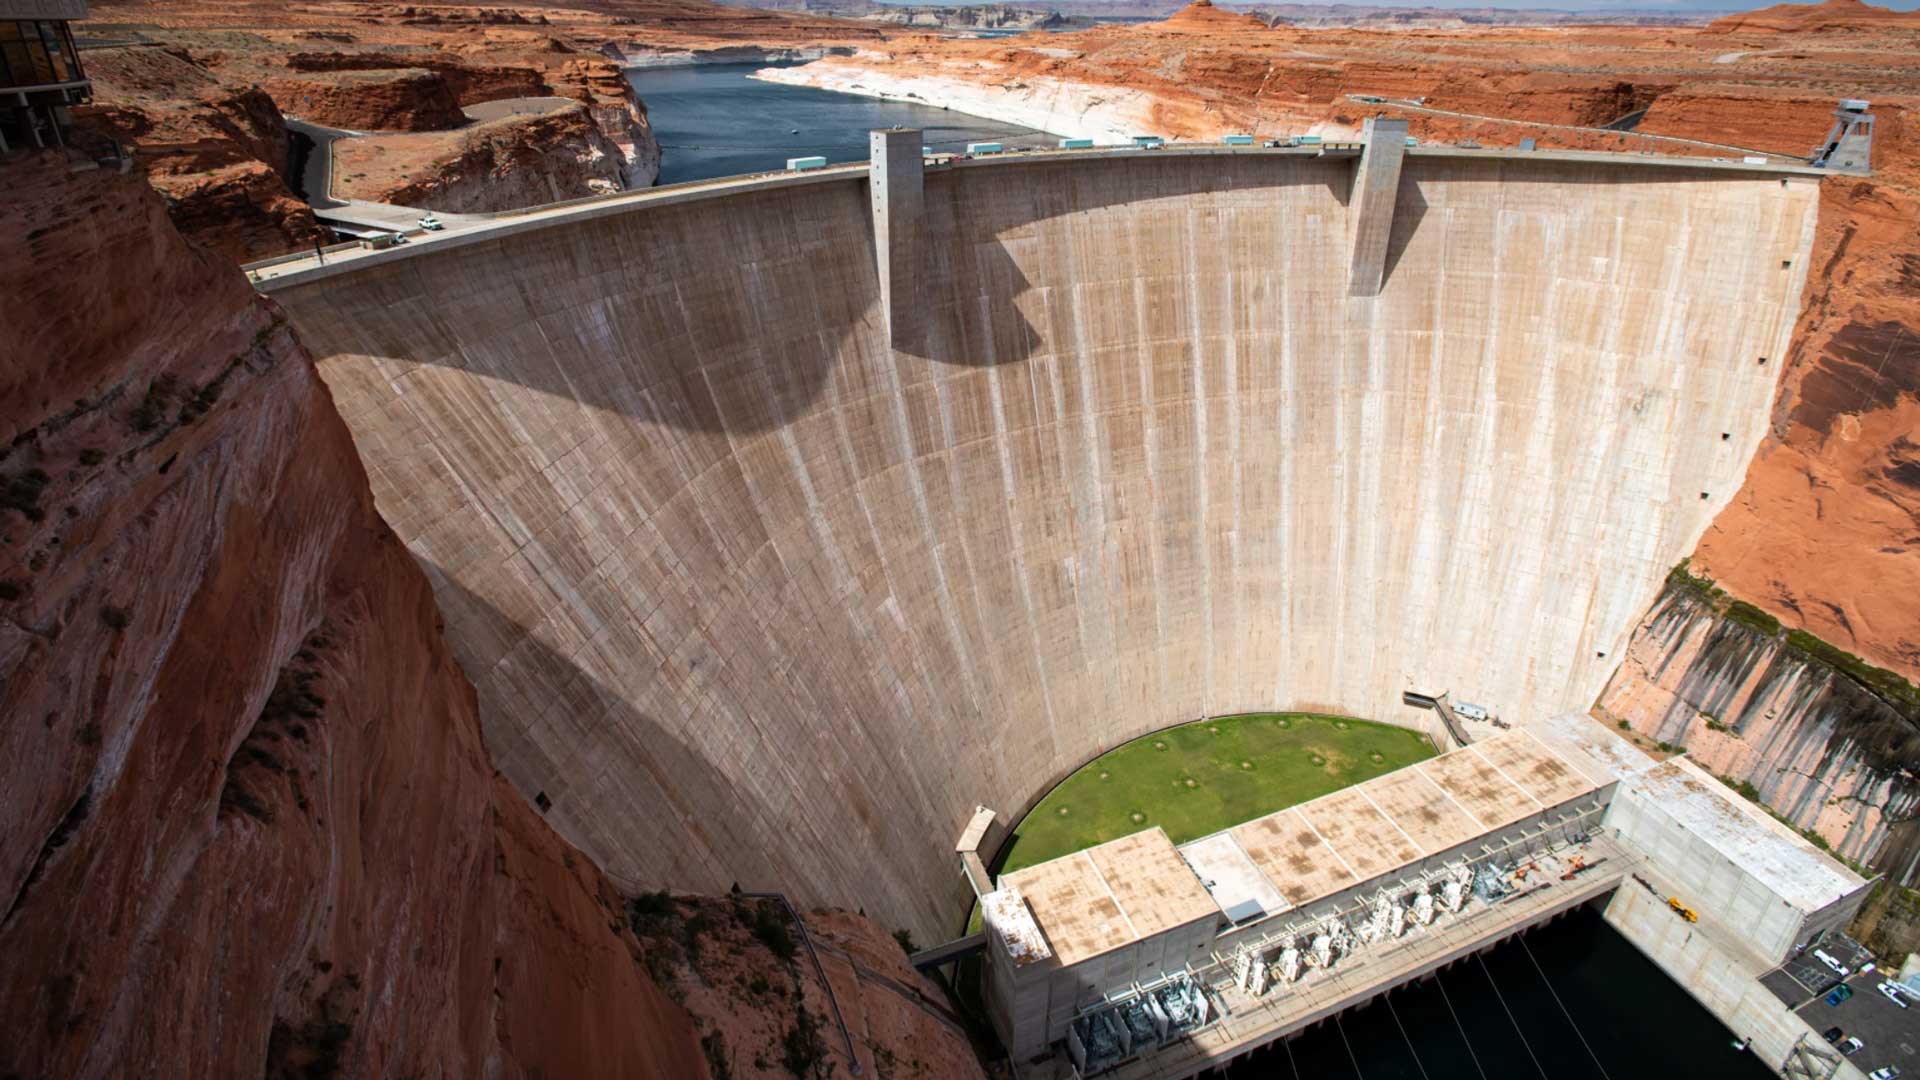 Water levels are at record lows and still dropping in the nation's largest reservoirs. The federal government began the process of restricting water releases from Glen Canyon Dam, which holds back a shrinking Lake Powell.
